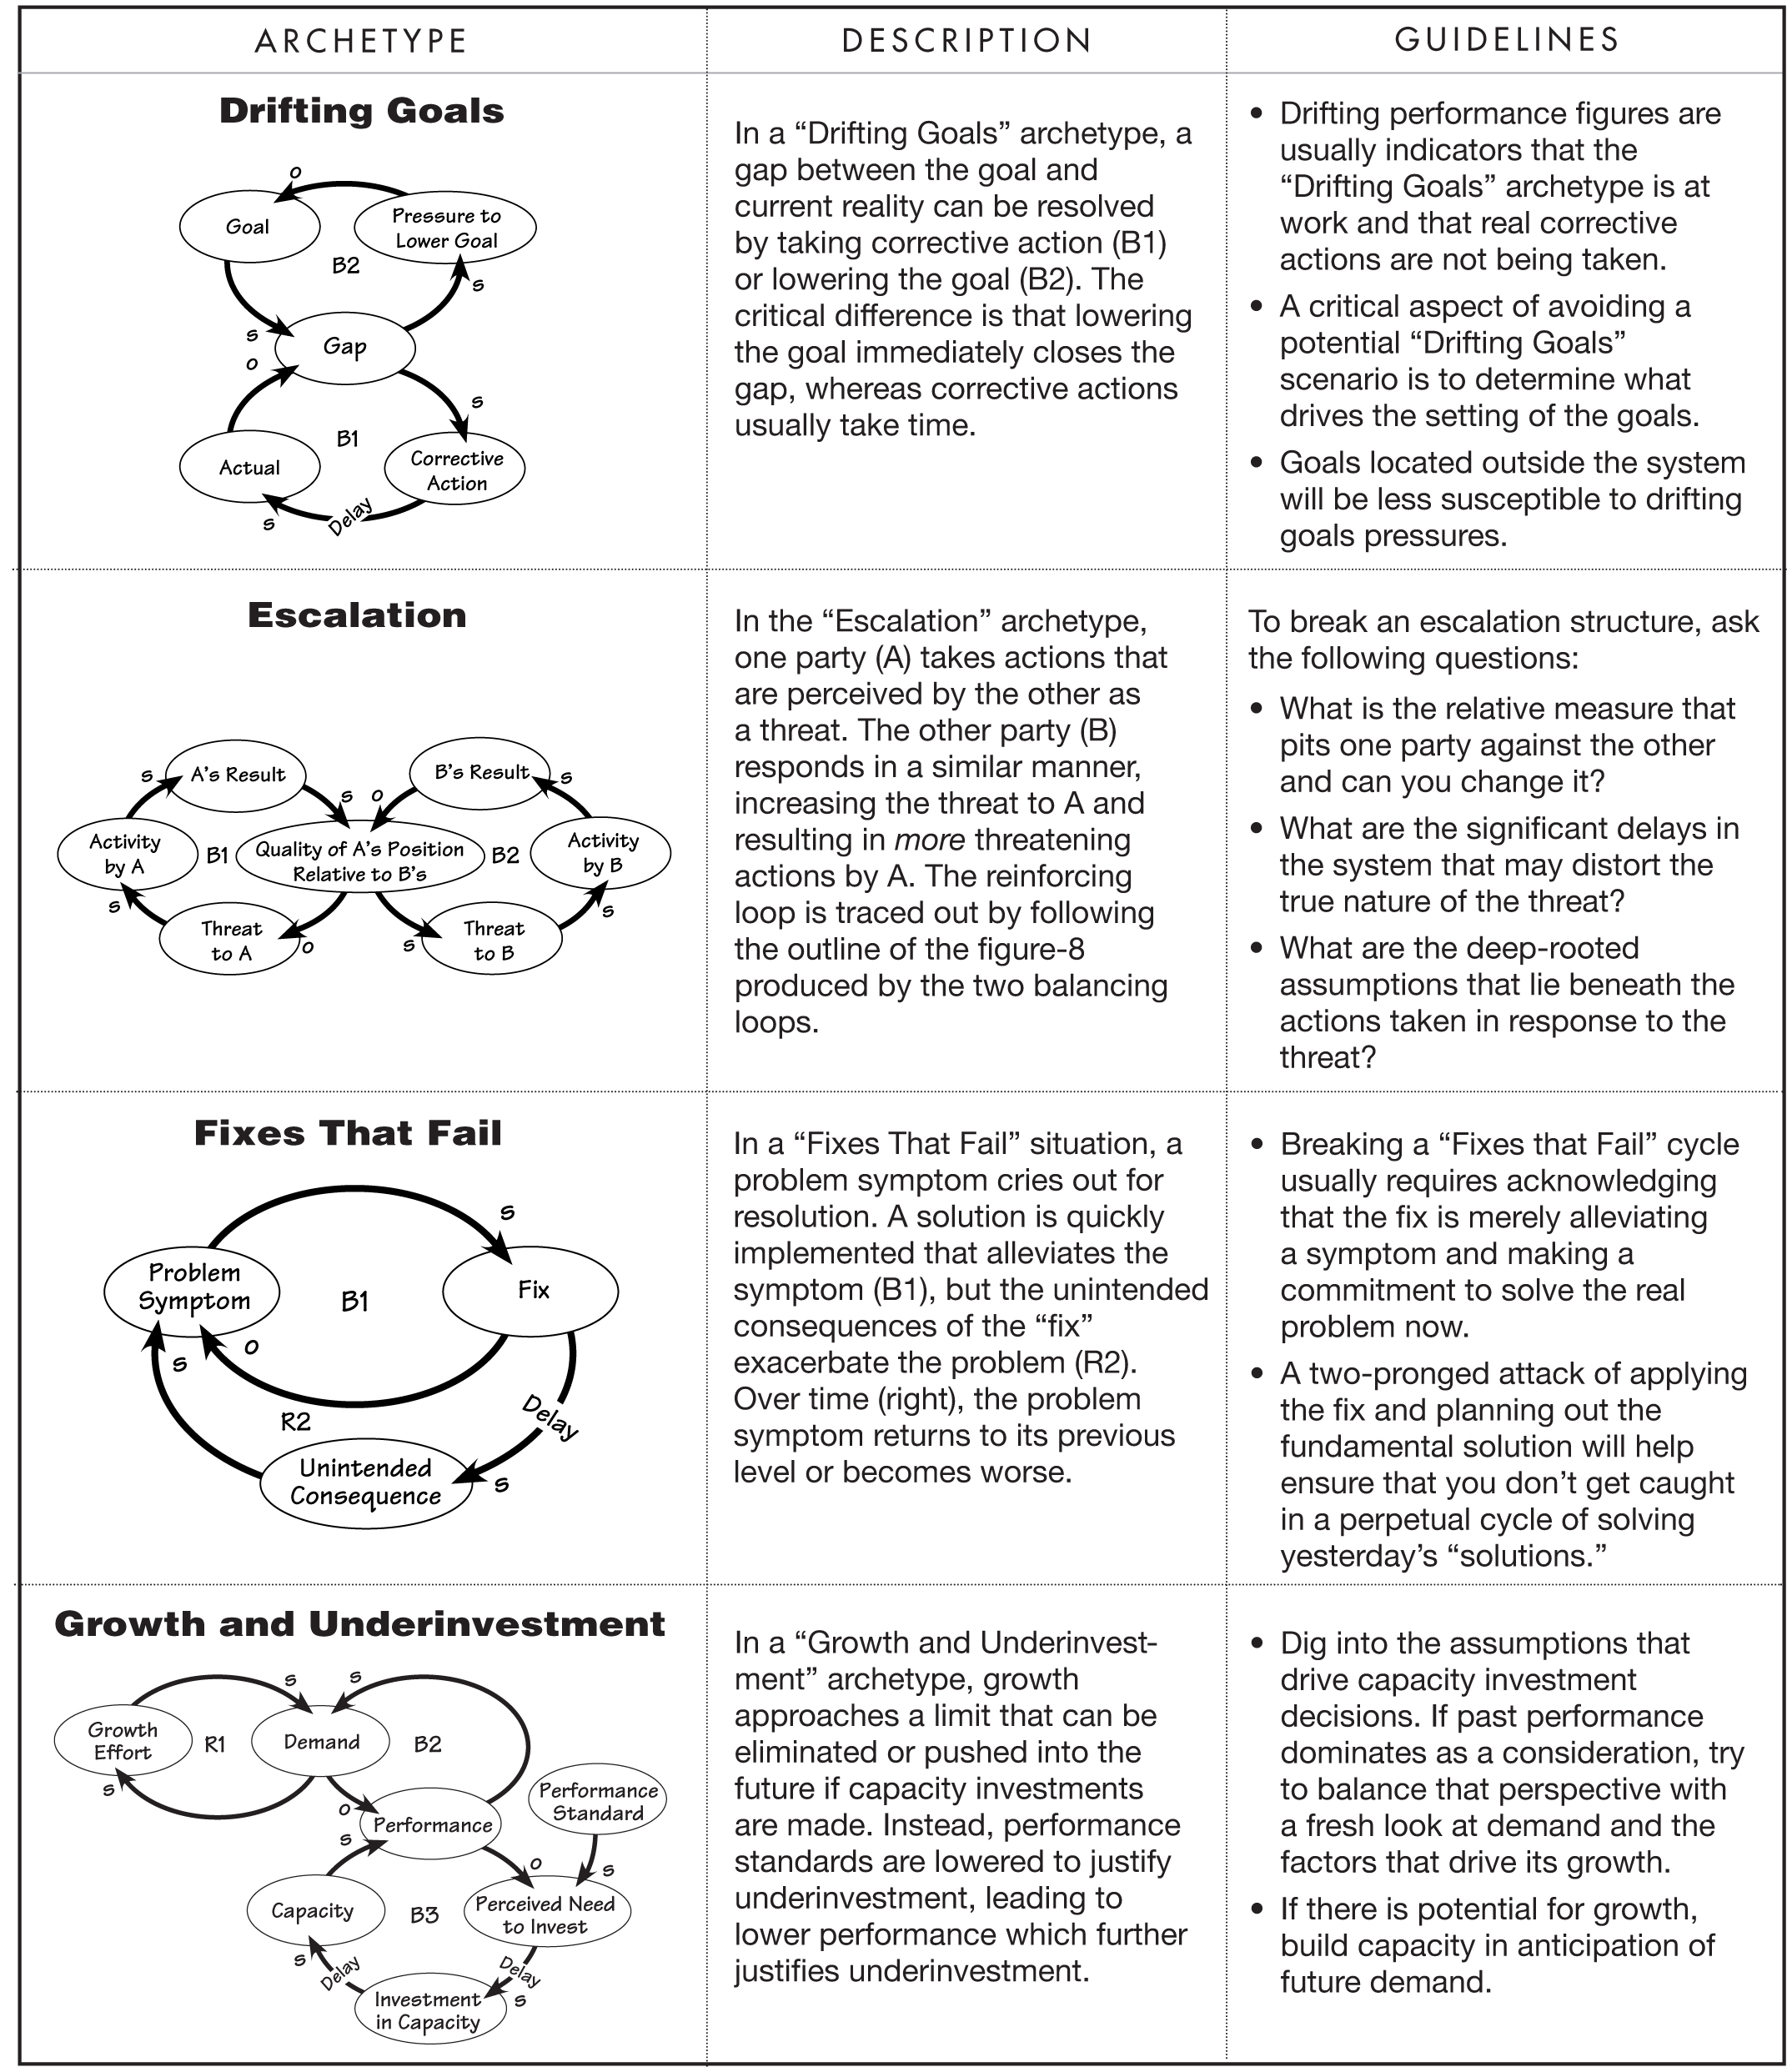 SYSTEMS ARCHETYPES AT A GLANCE